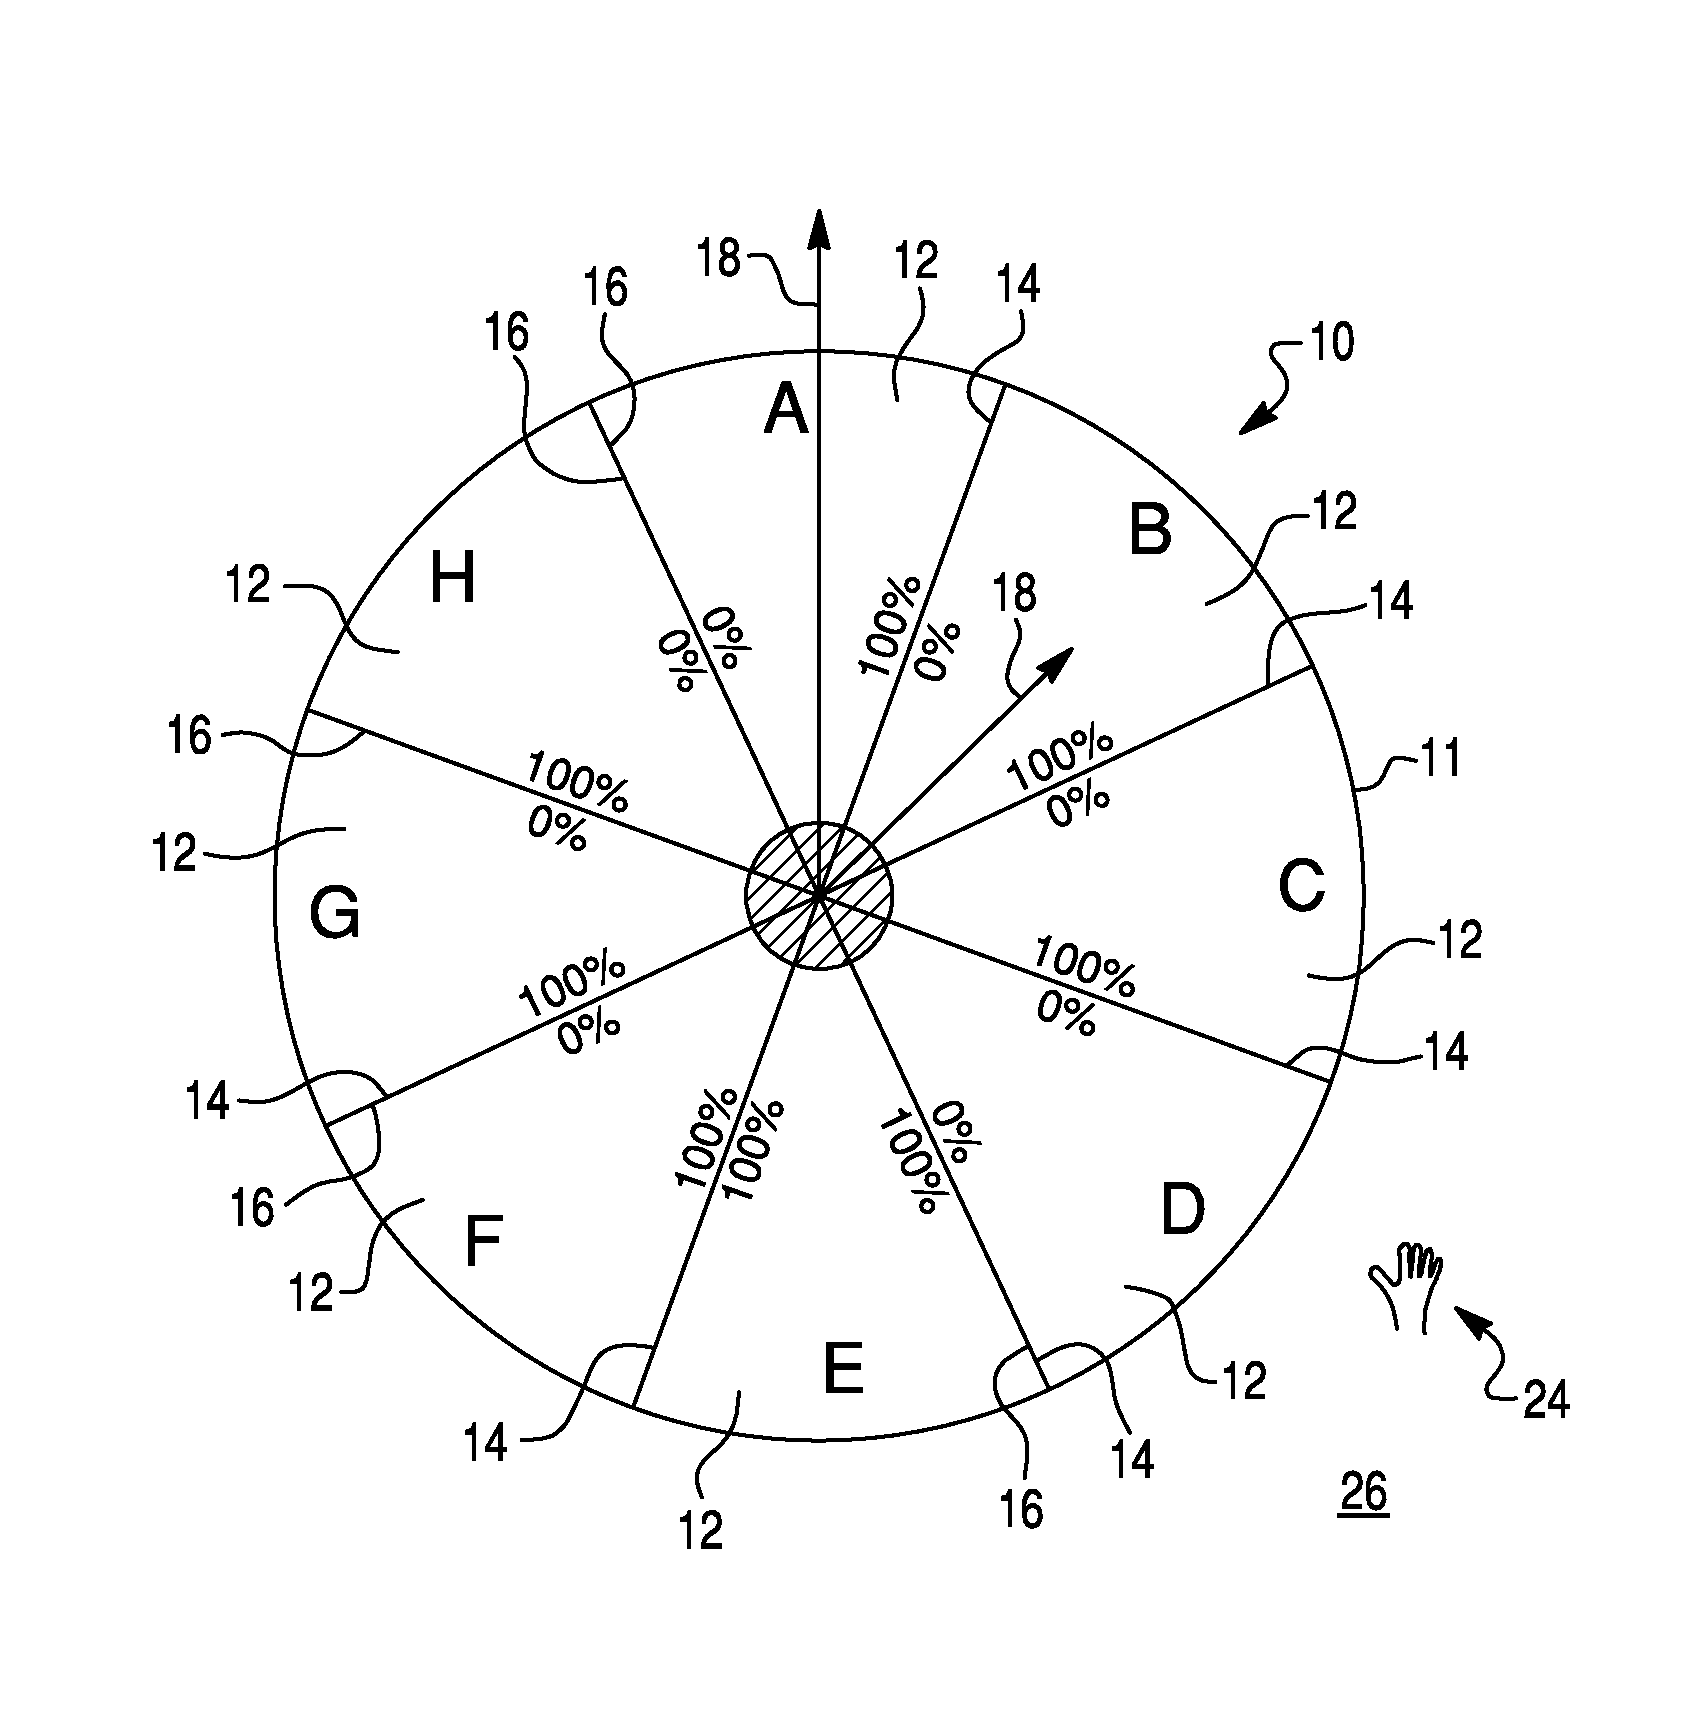 Radial control menu, graphical user interface, method of controlling variables using a radial control menu, and computer readable medium for performing the method